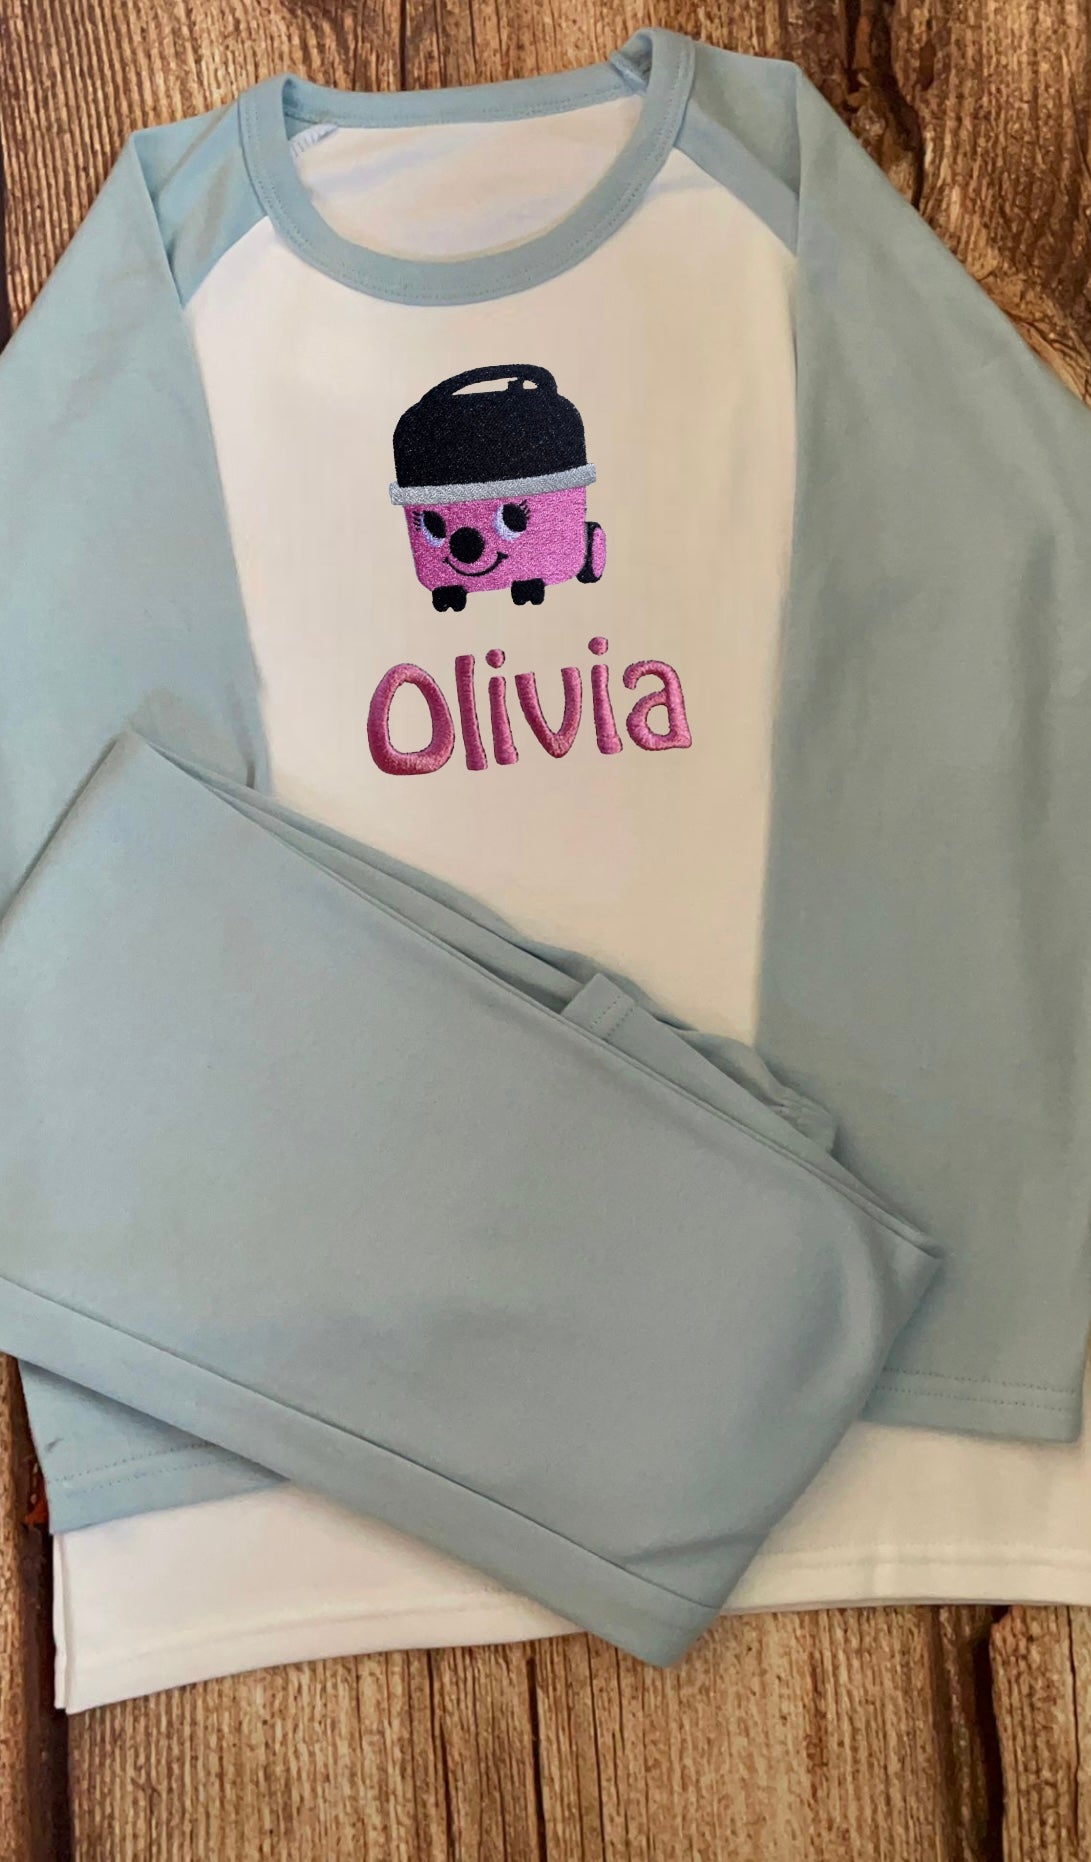 Personalised Pyjamas, embroidered with name & pink hoover design. Gift, keepsake, high quality, soft, PJ's